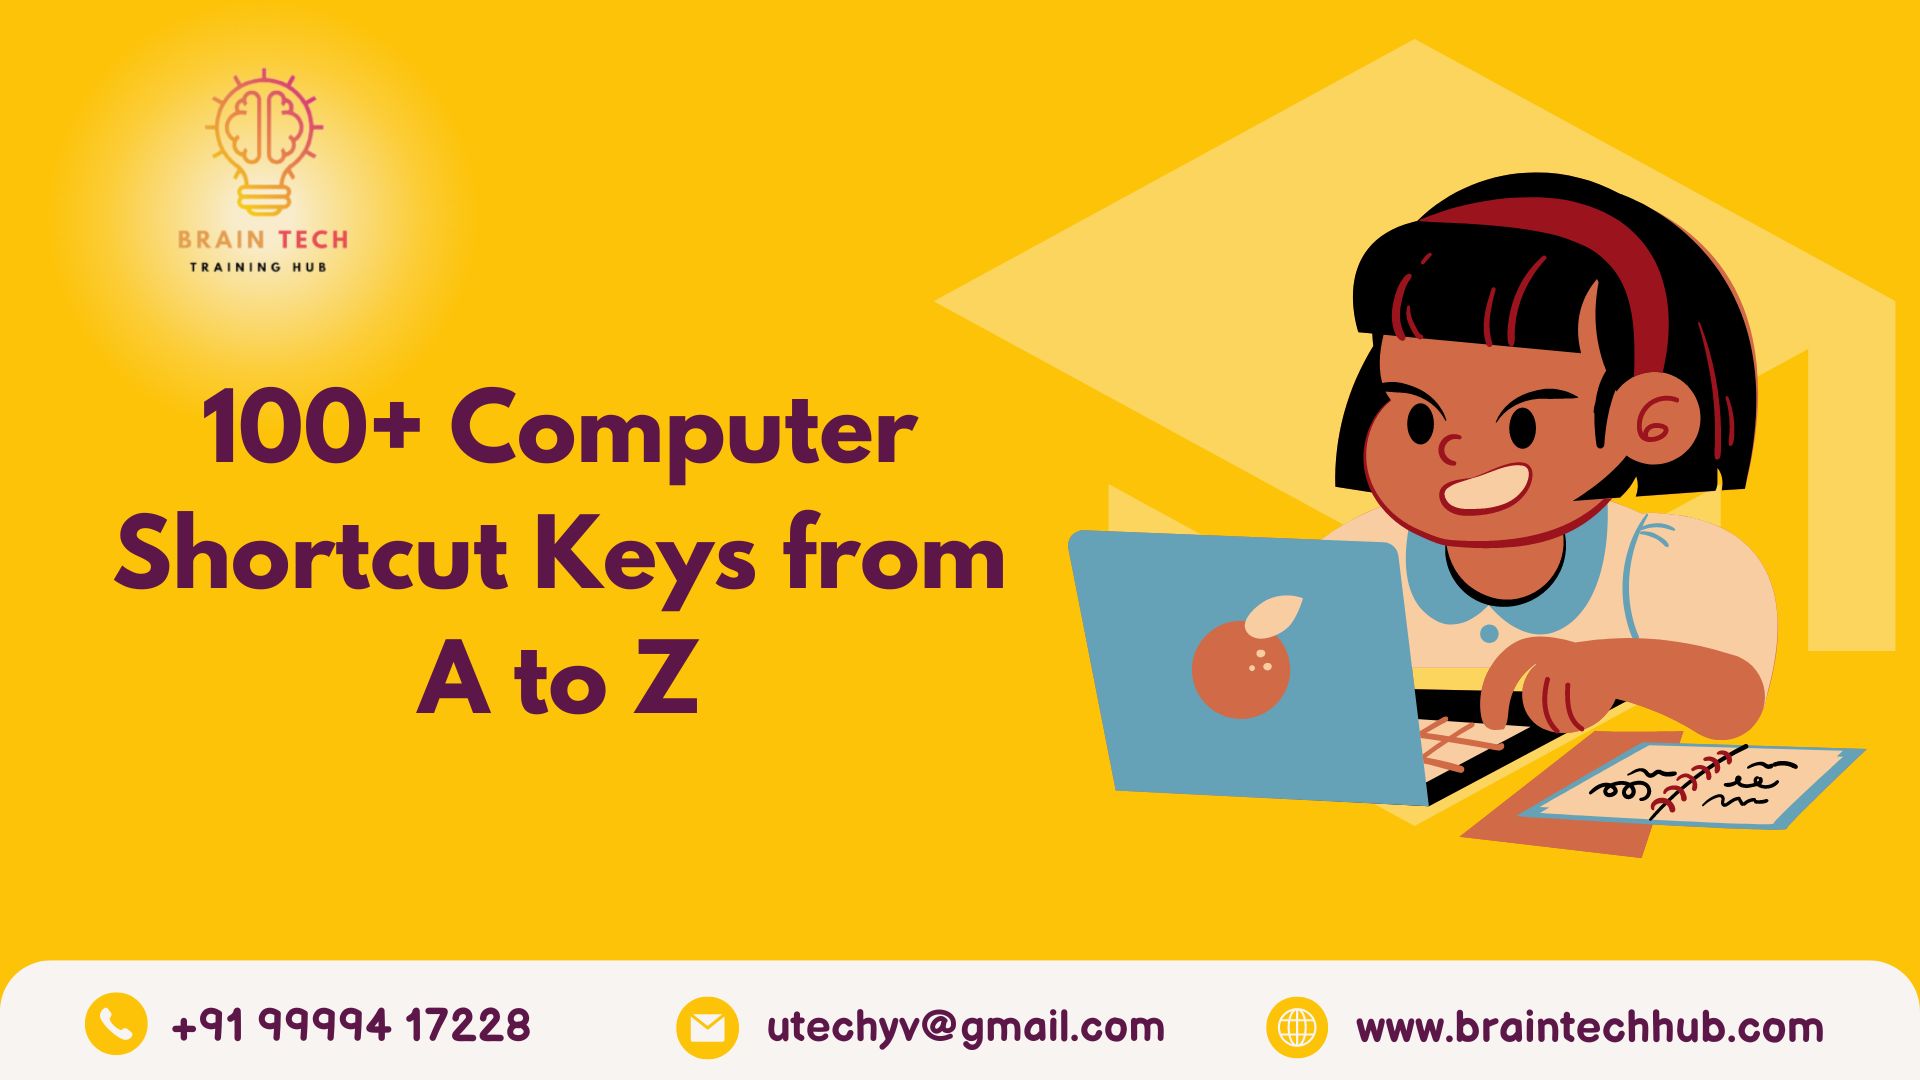 Computer Shortcut Keys from A to Z